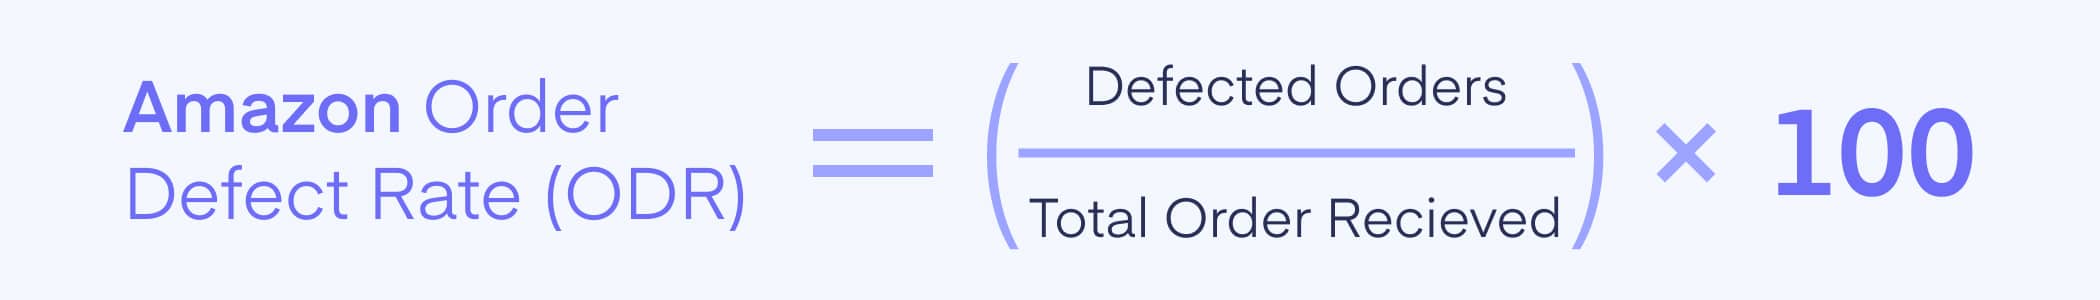 Calculation of Amazon Order Defect Rate